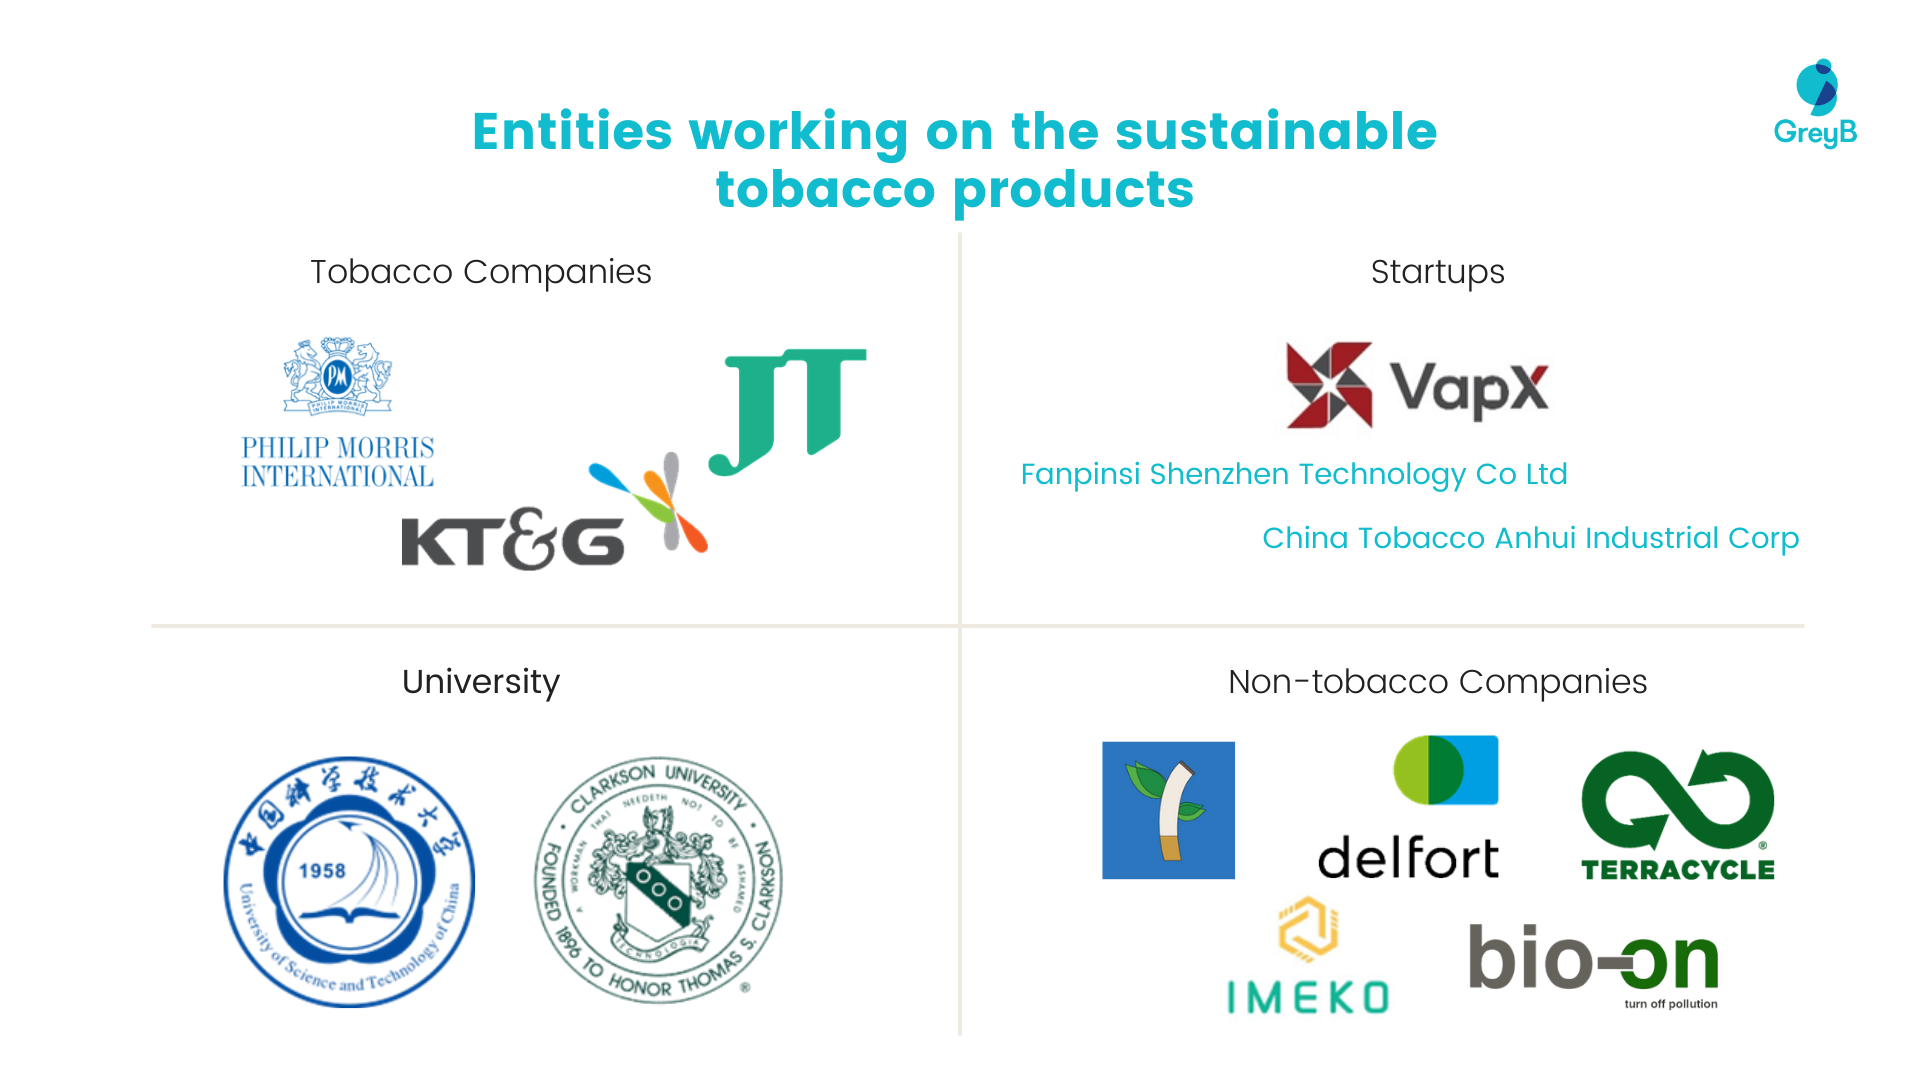 Entities working on the sustainable tobacco products